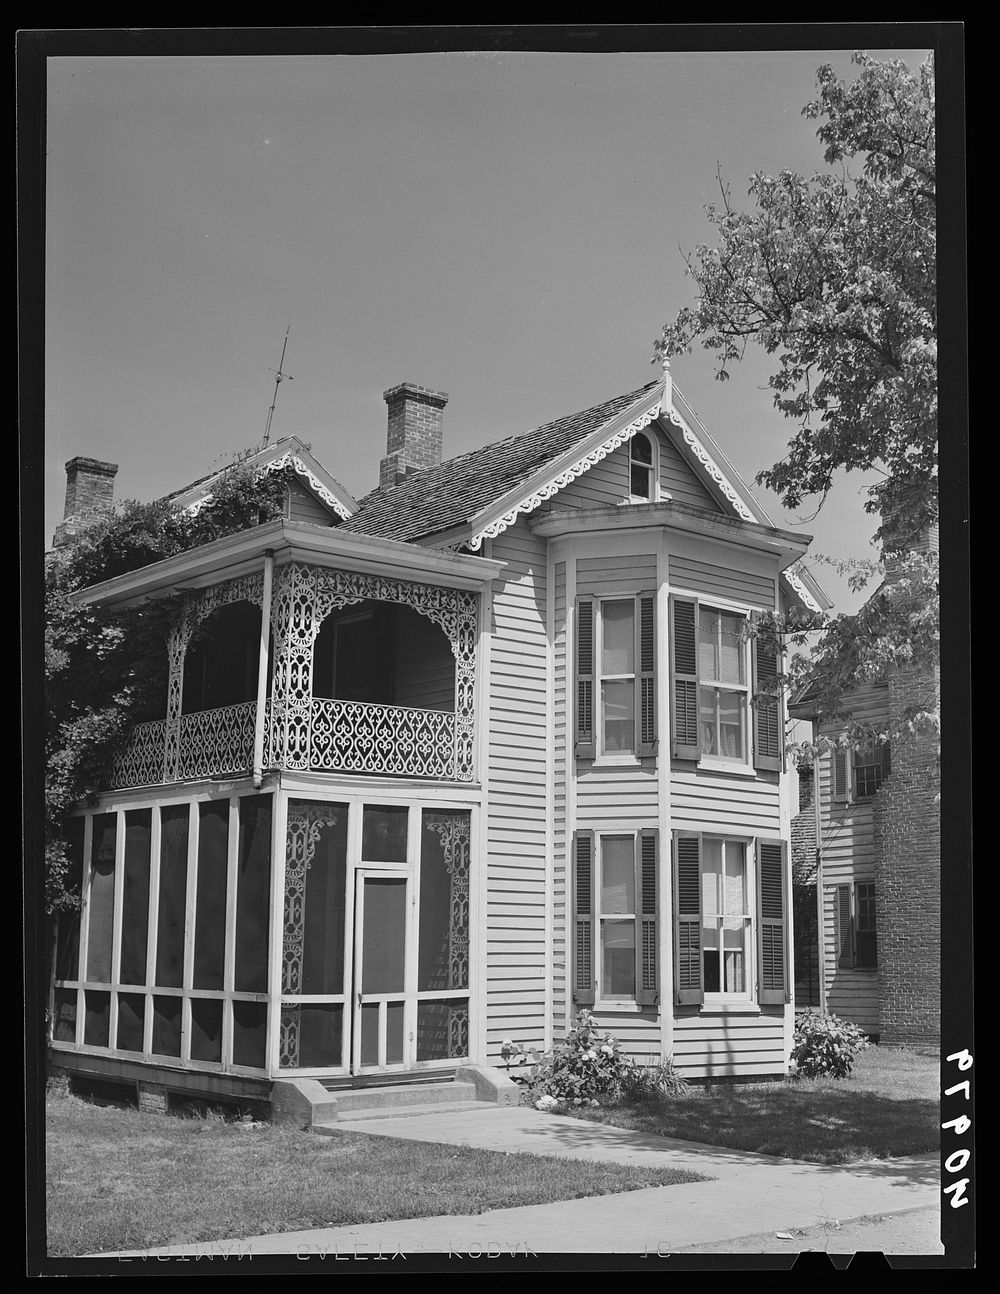 House in Mardela, Maryland. Sourced from the Library of Congress.